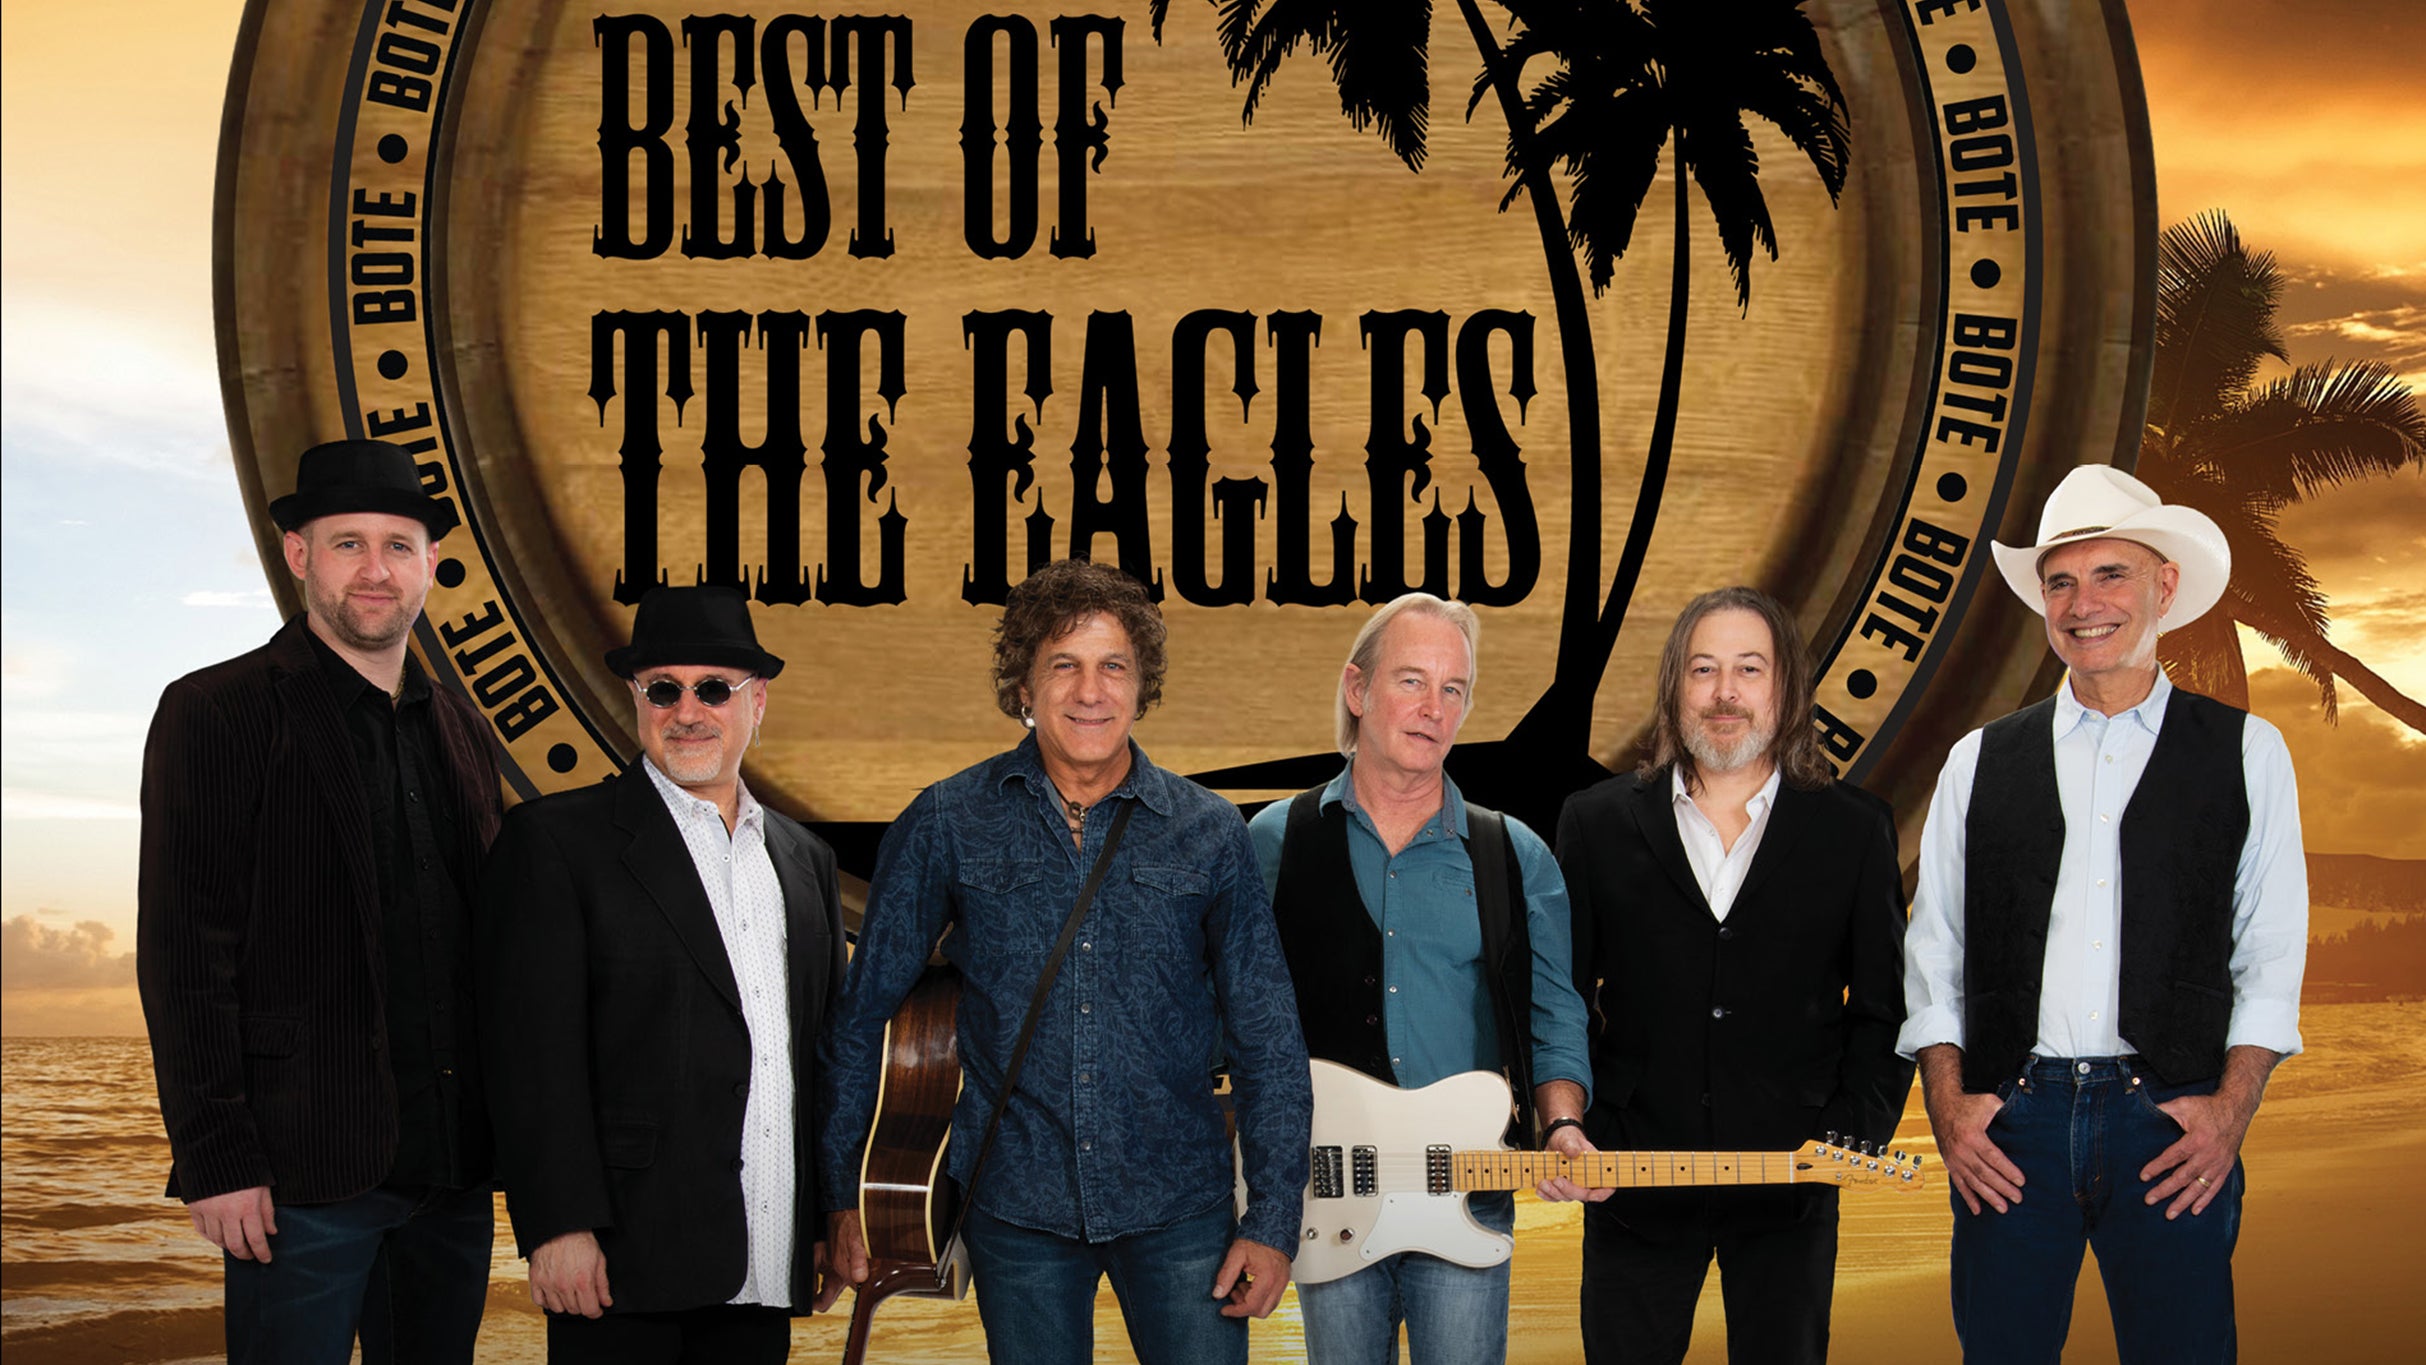 Best Of The Eagles at Proctor's Theatre